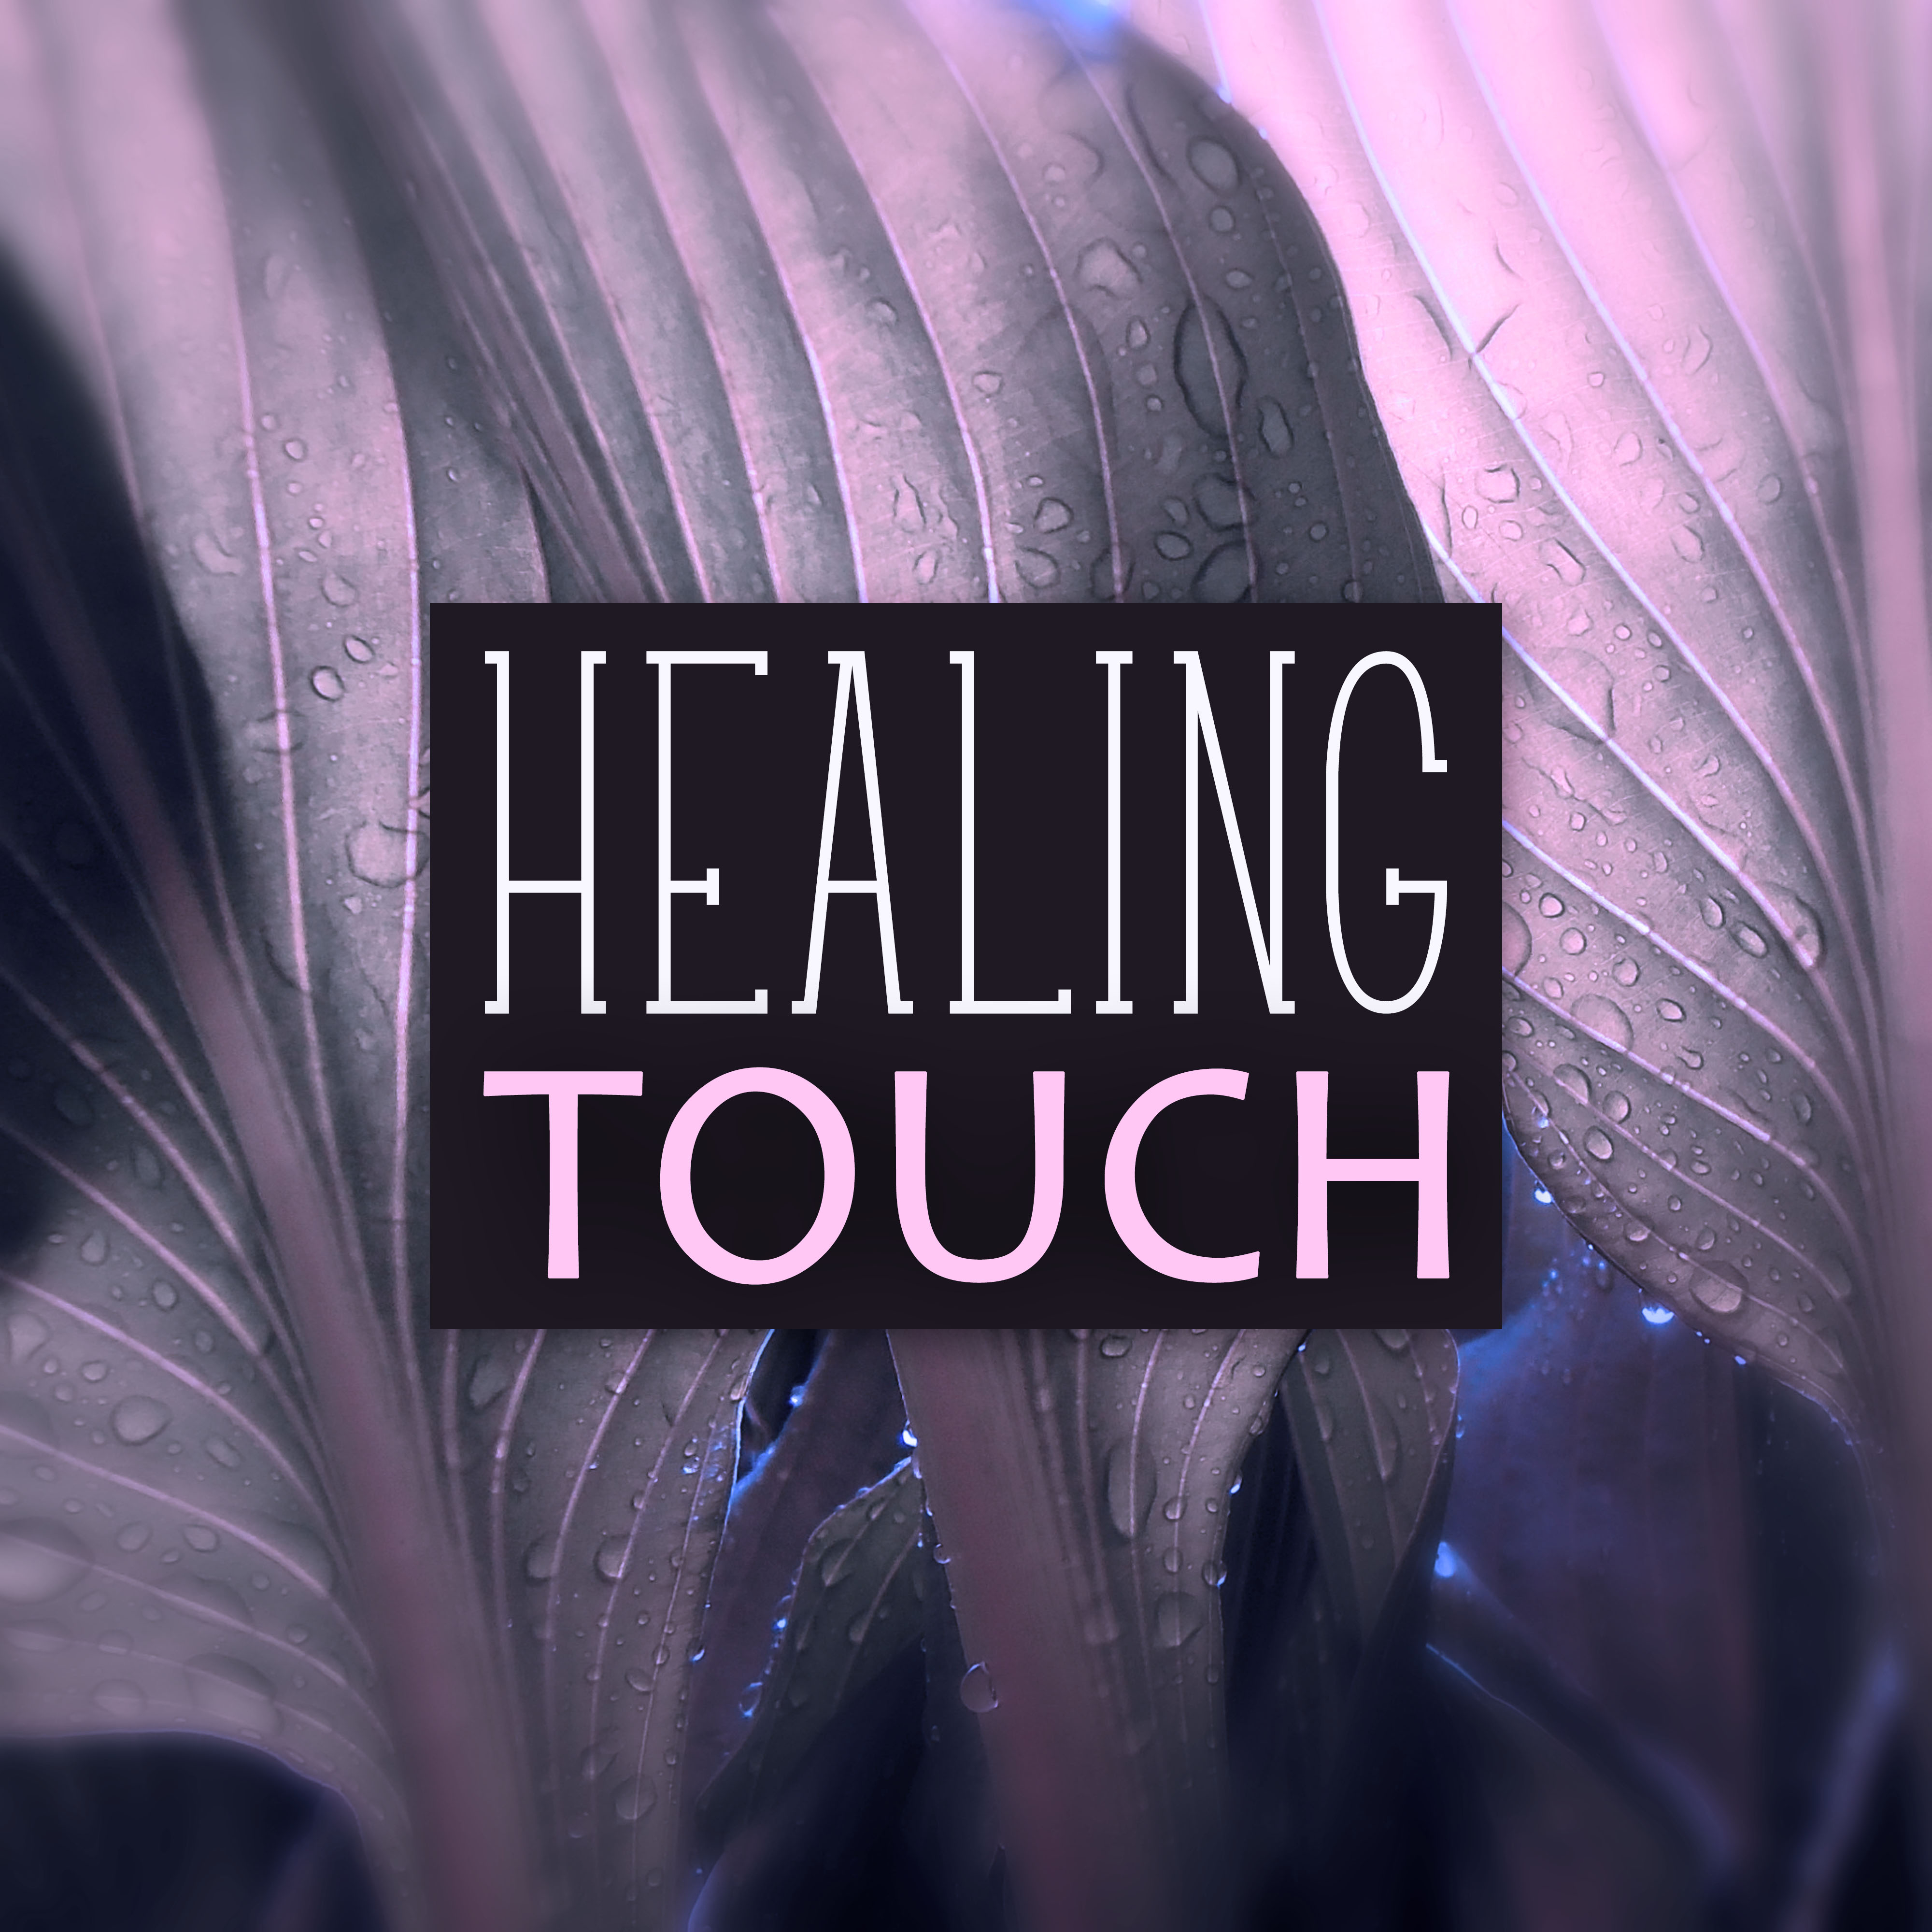 Healing Touch  Calm Music for Relaxation, Deep Sounds for Massage, Gentle Background Music, Soft Nature Sounds, Acupressure